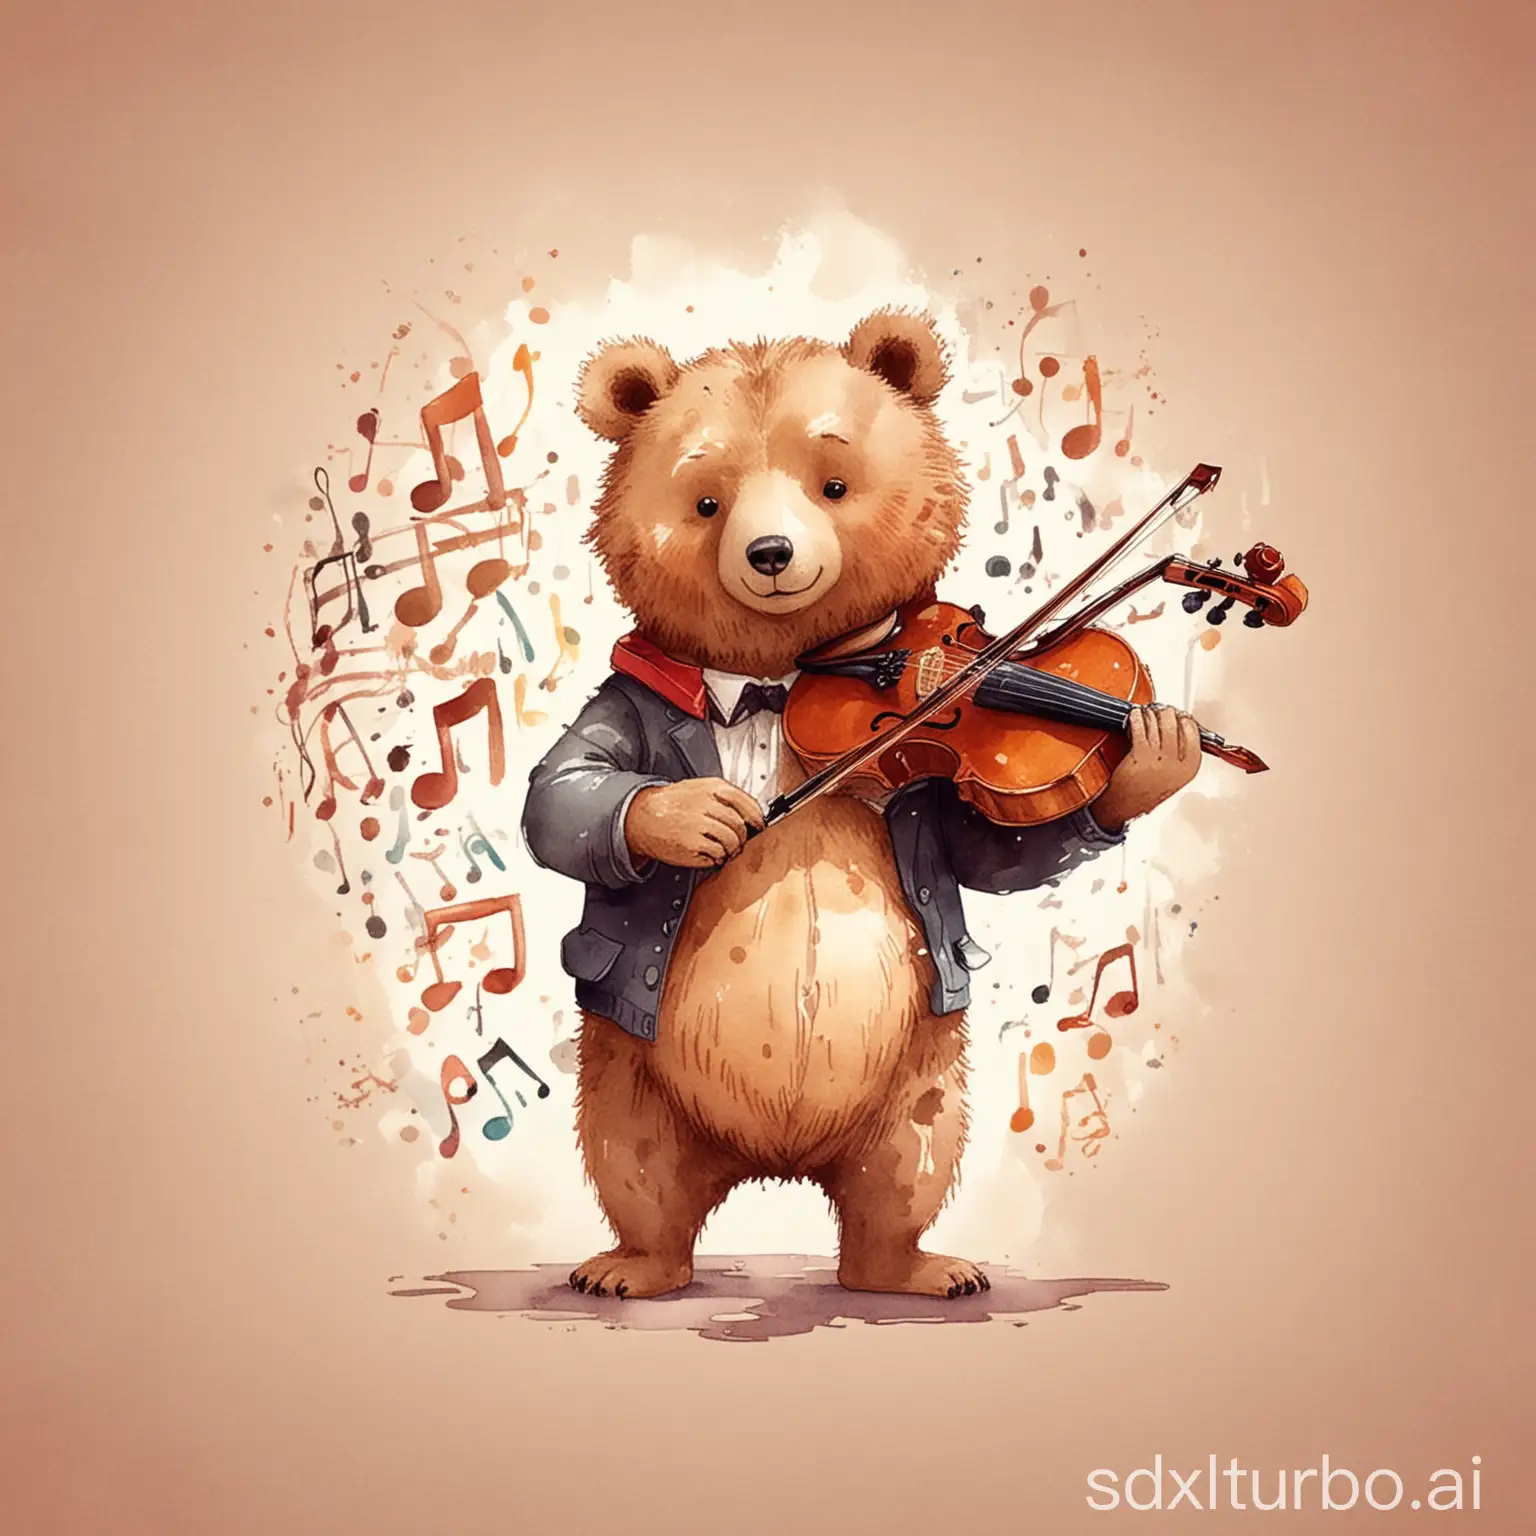 A bear playing the violin has musical notes next to it, cartoon flat watercolor style